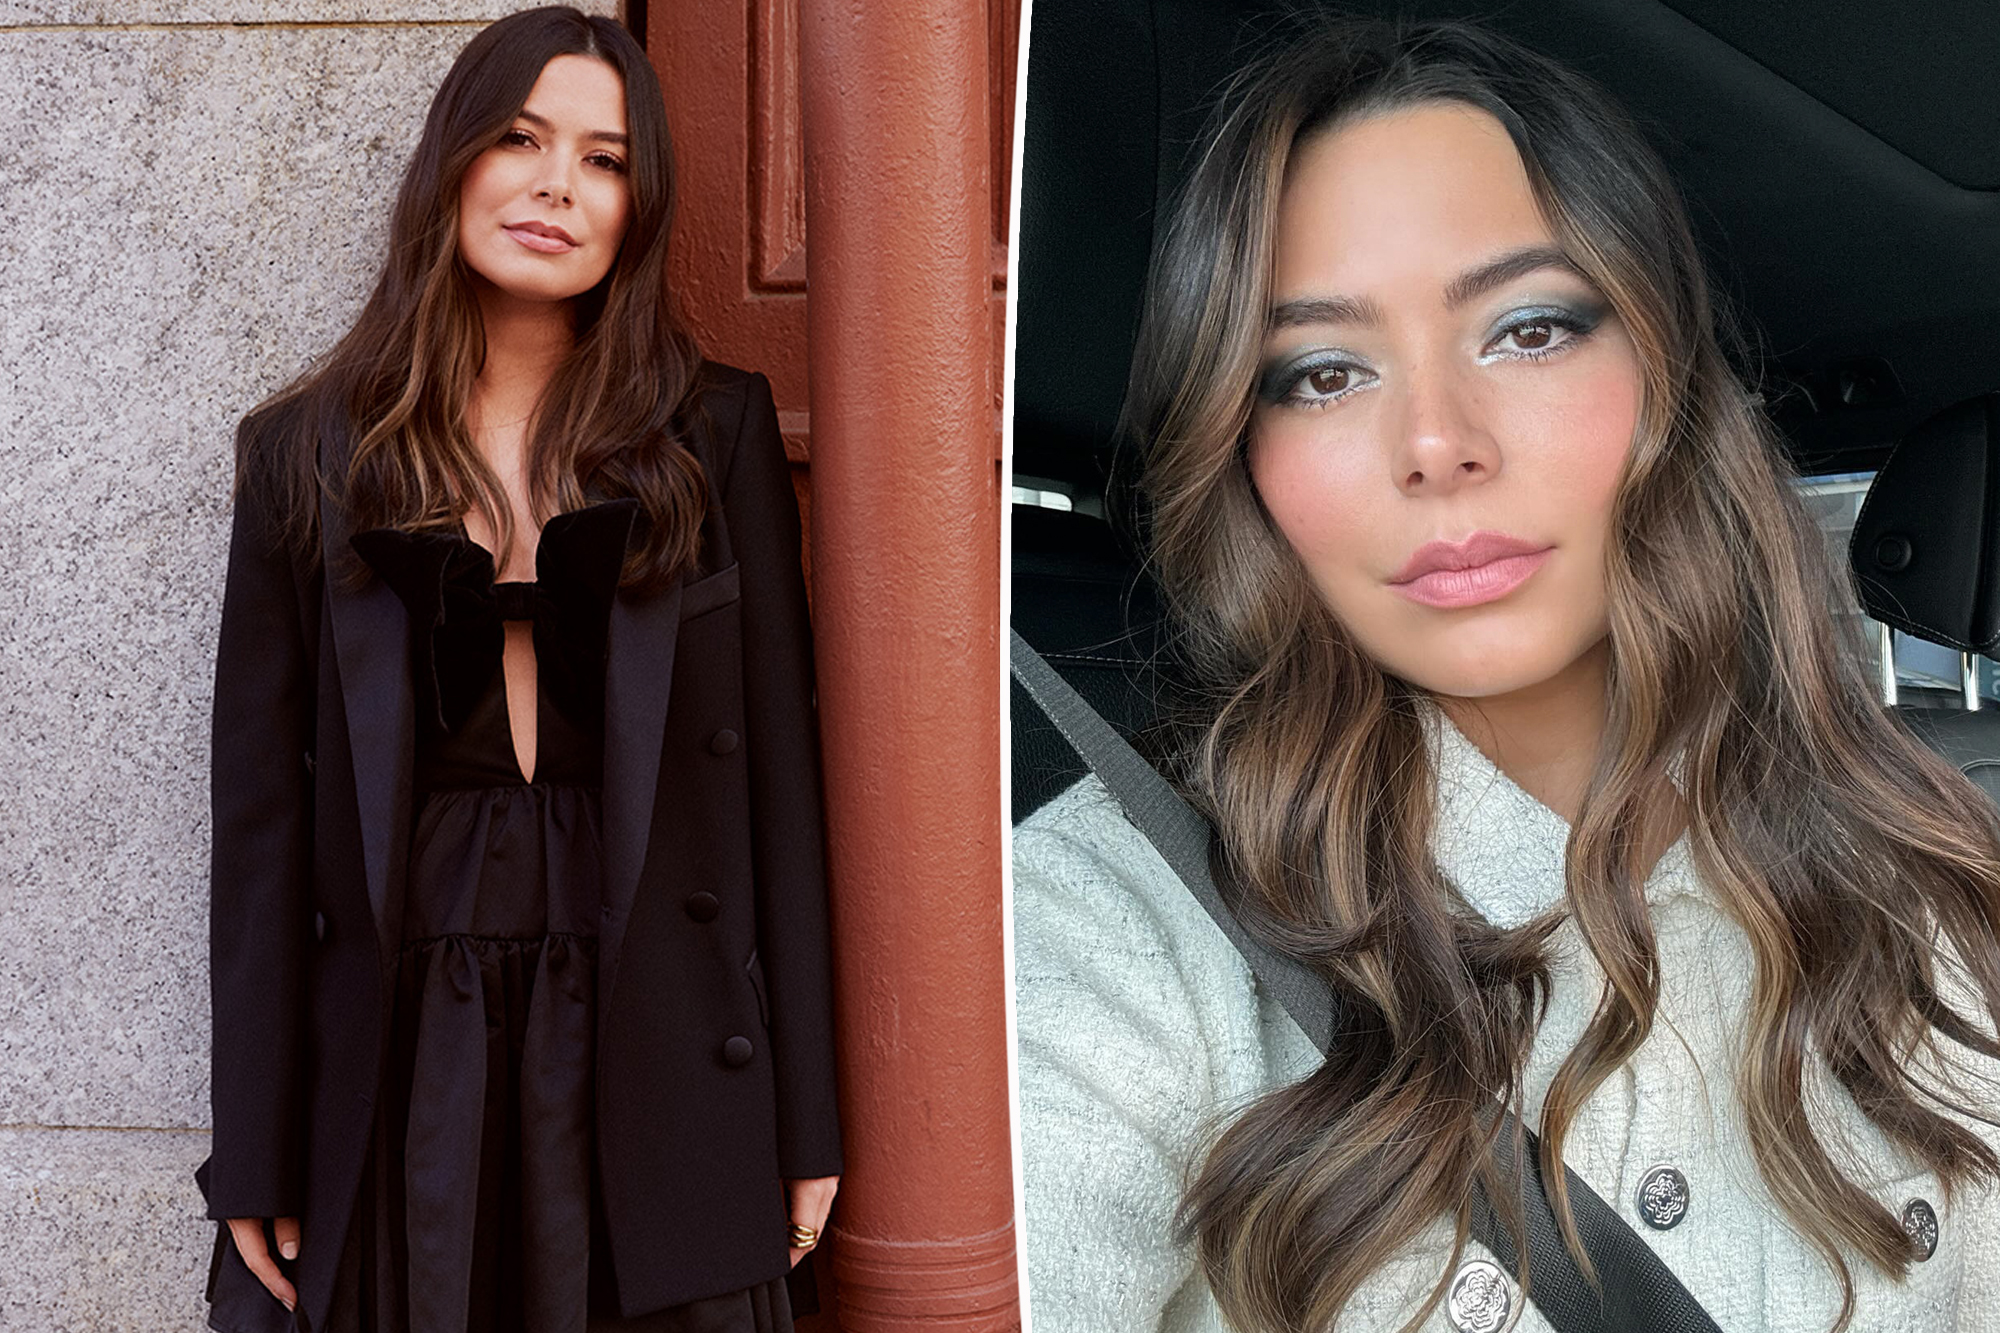 Miranda Cosgrove Opens Up About Overcoming Stalking Incident